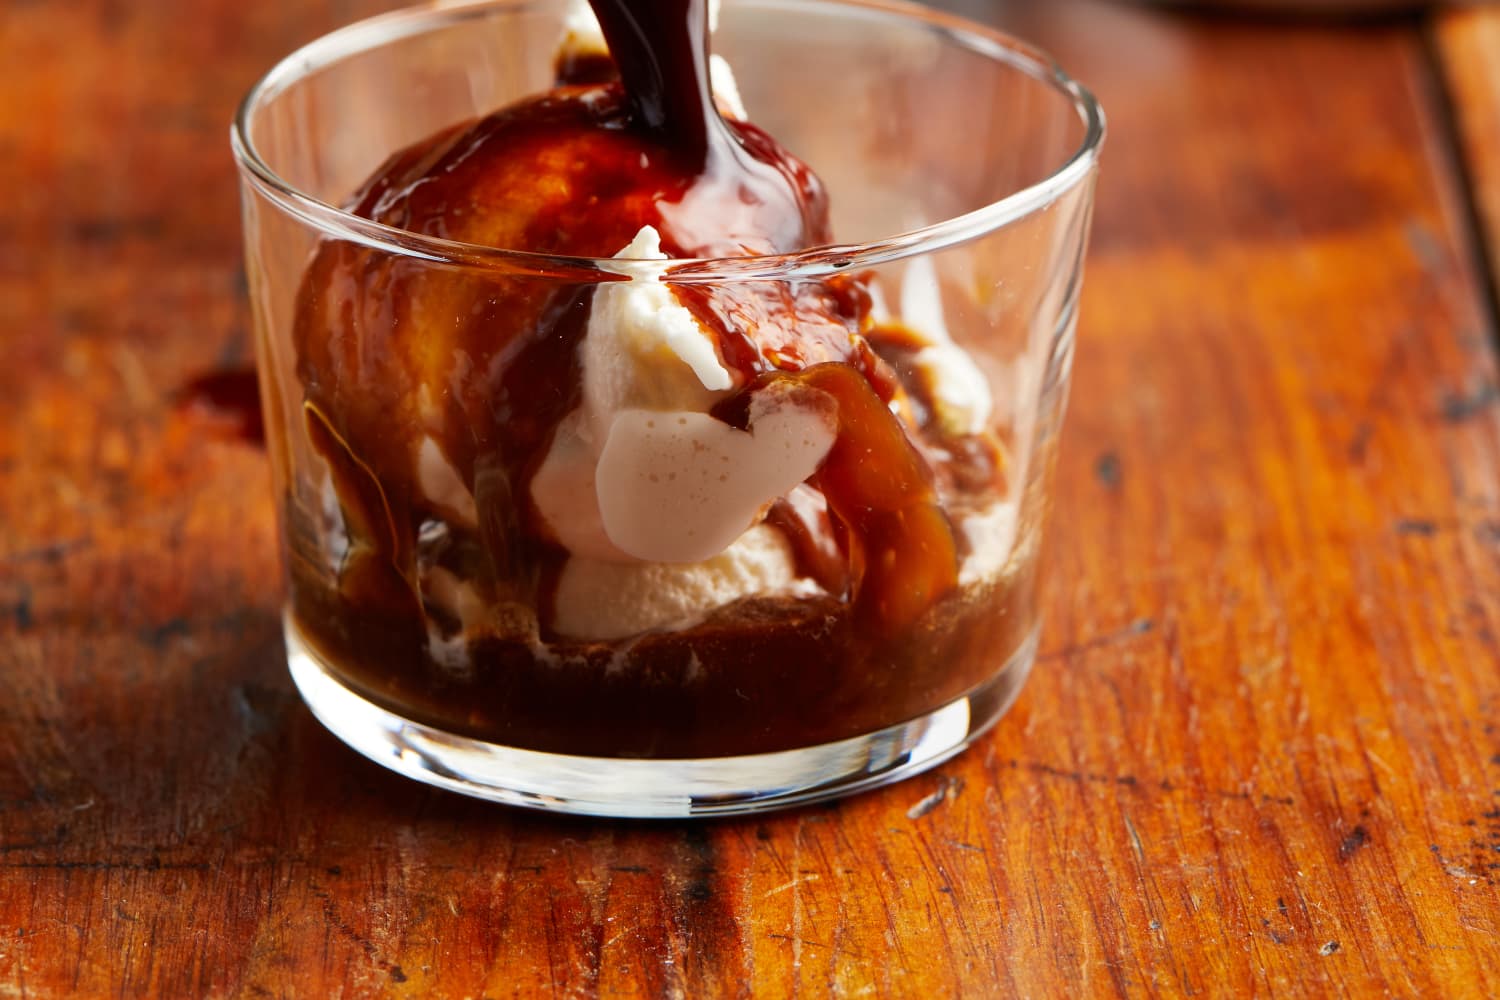 The Best and Easiest Affogato Recipe To Make At Home - DeLallo